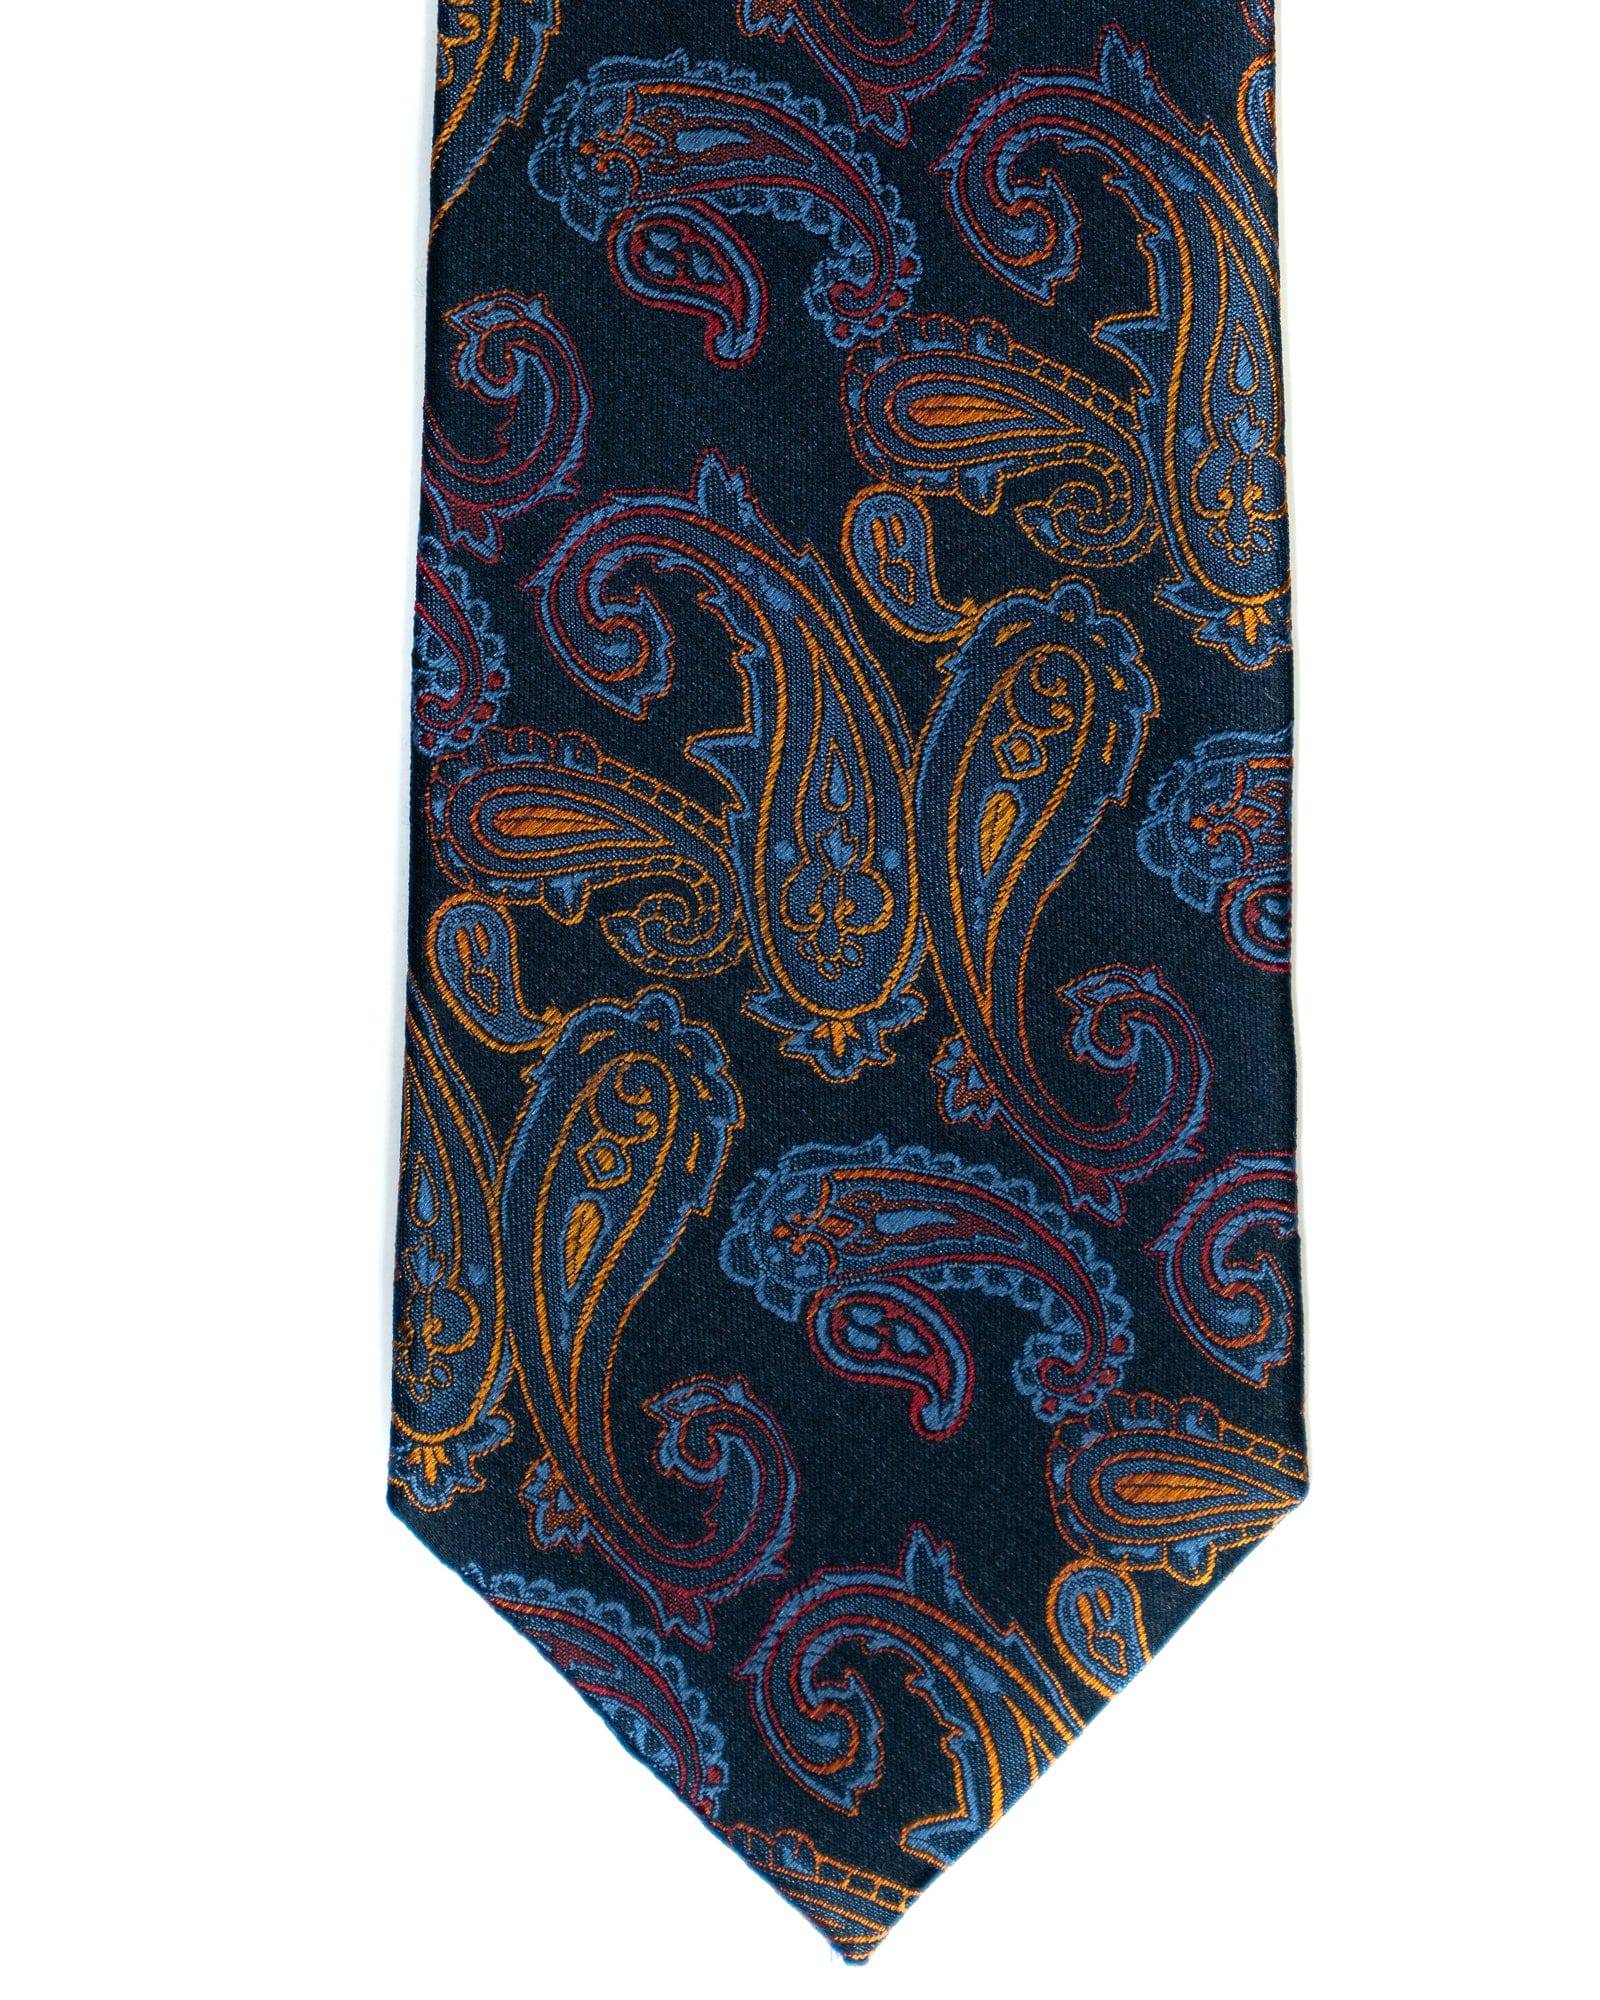 Paisley Silk Tie in Navy With Red - Rainwater's Men's Clothing and Tuxedo Rental